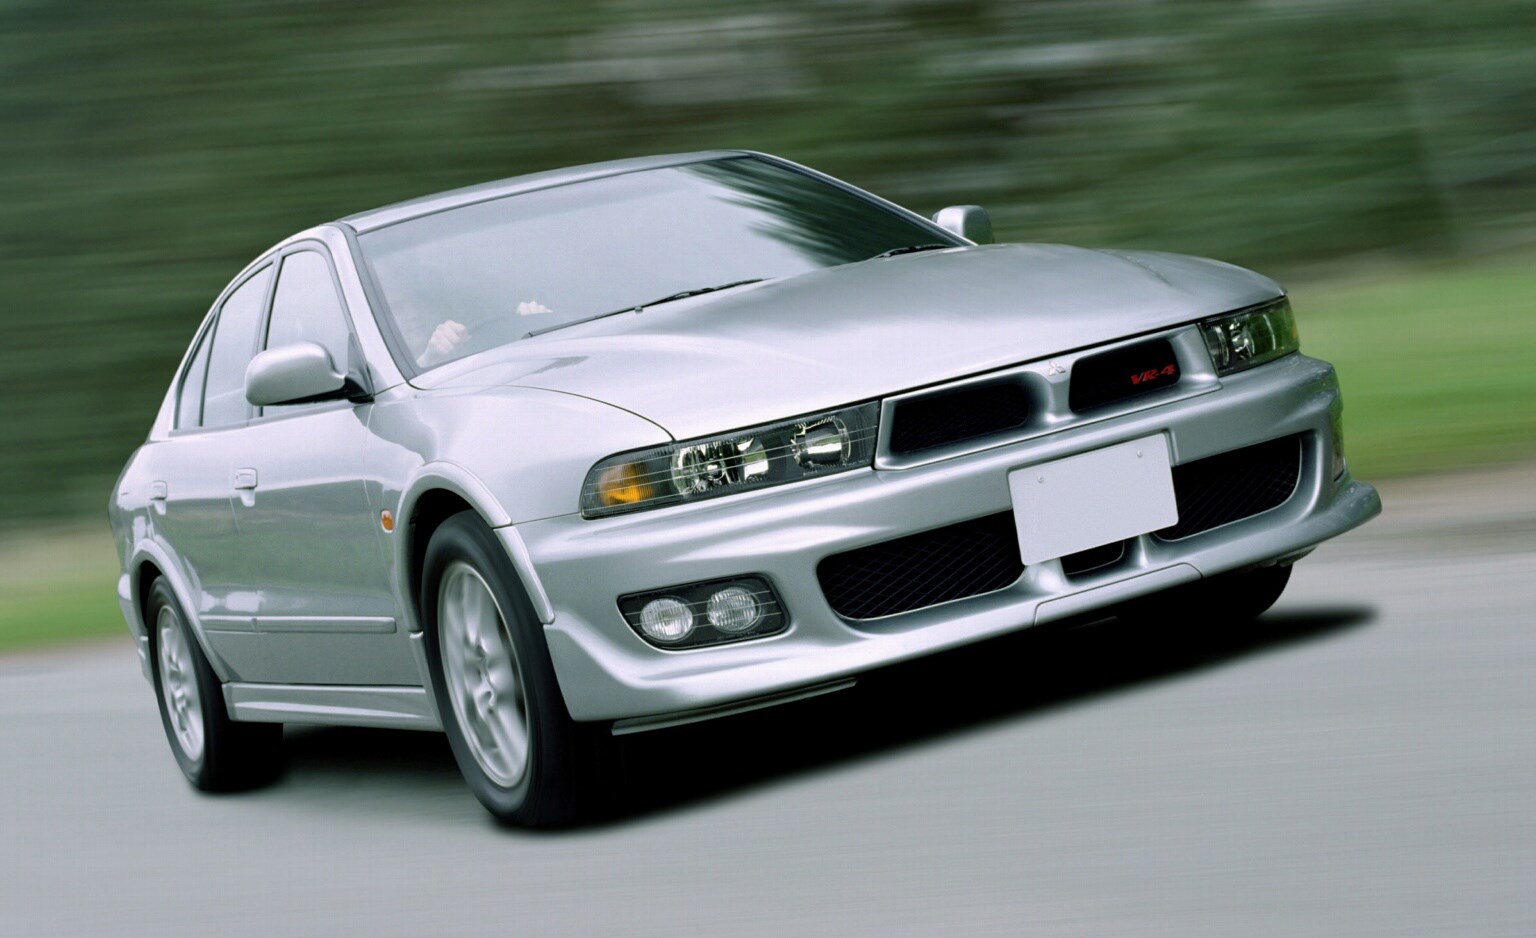 Used Mitsubishi Galant Saloon (1997 - 2003) Review | Parkers